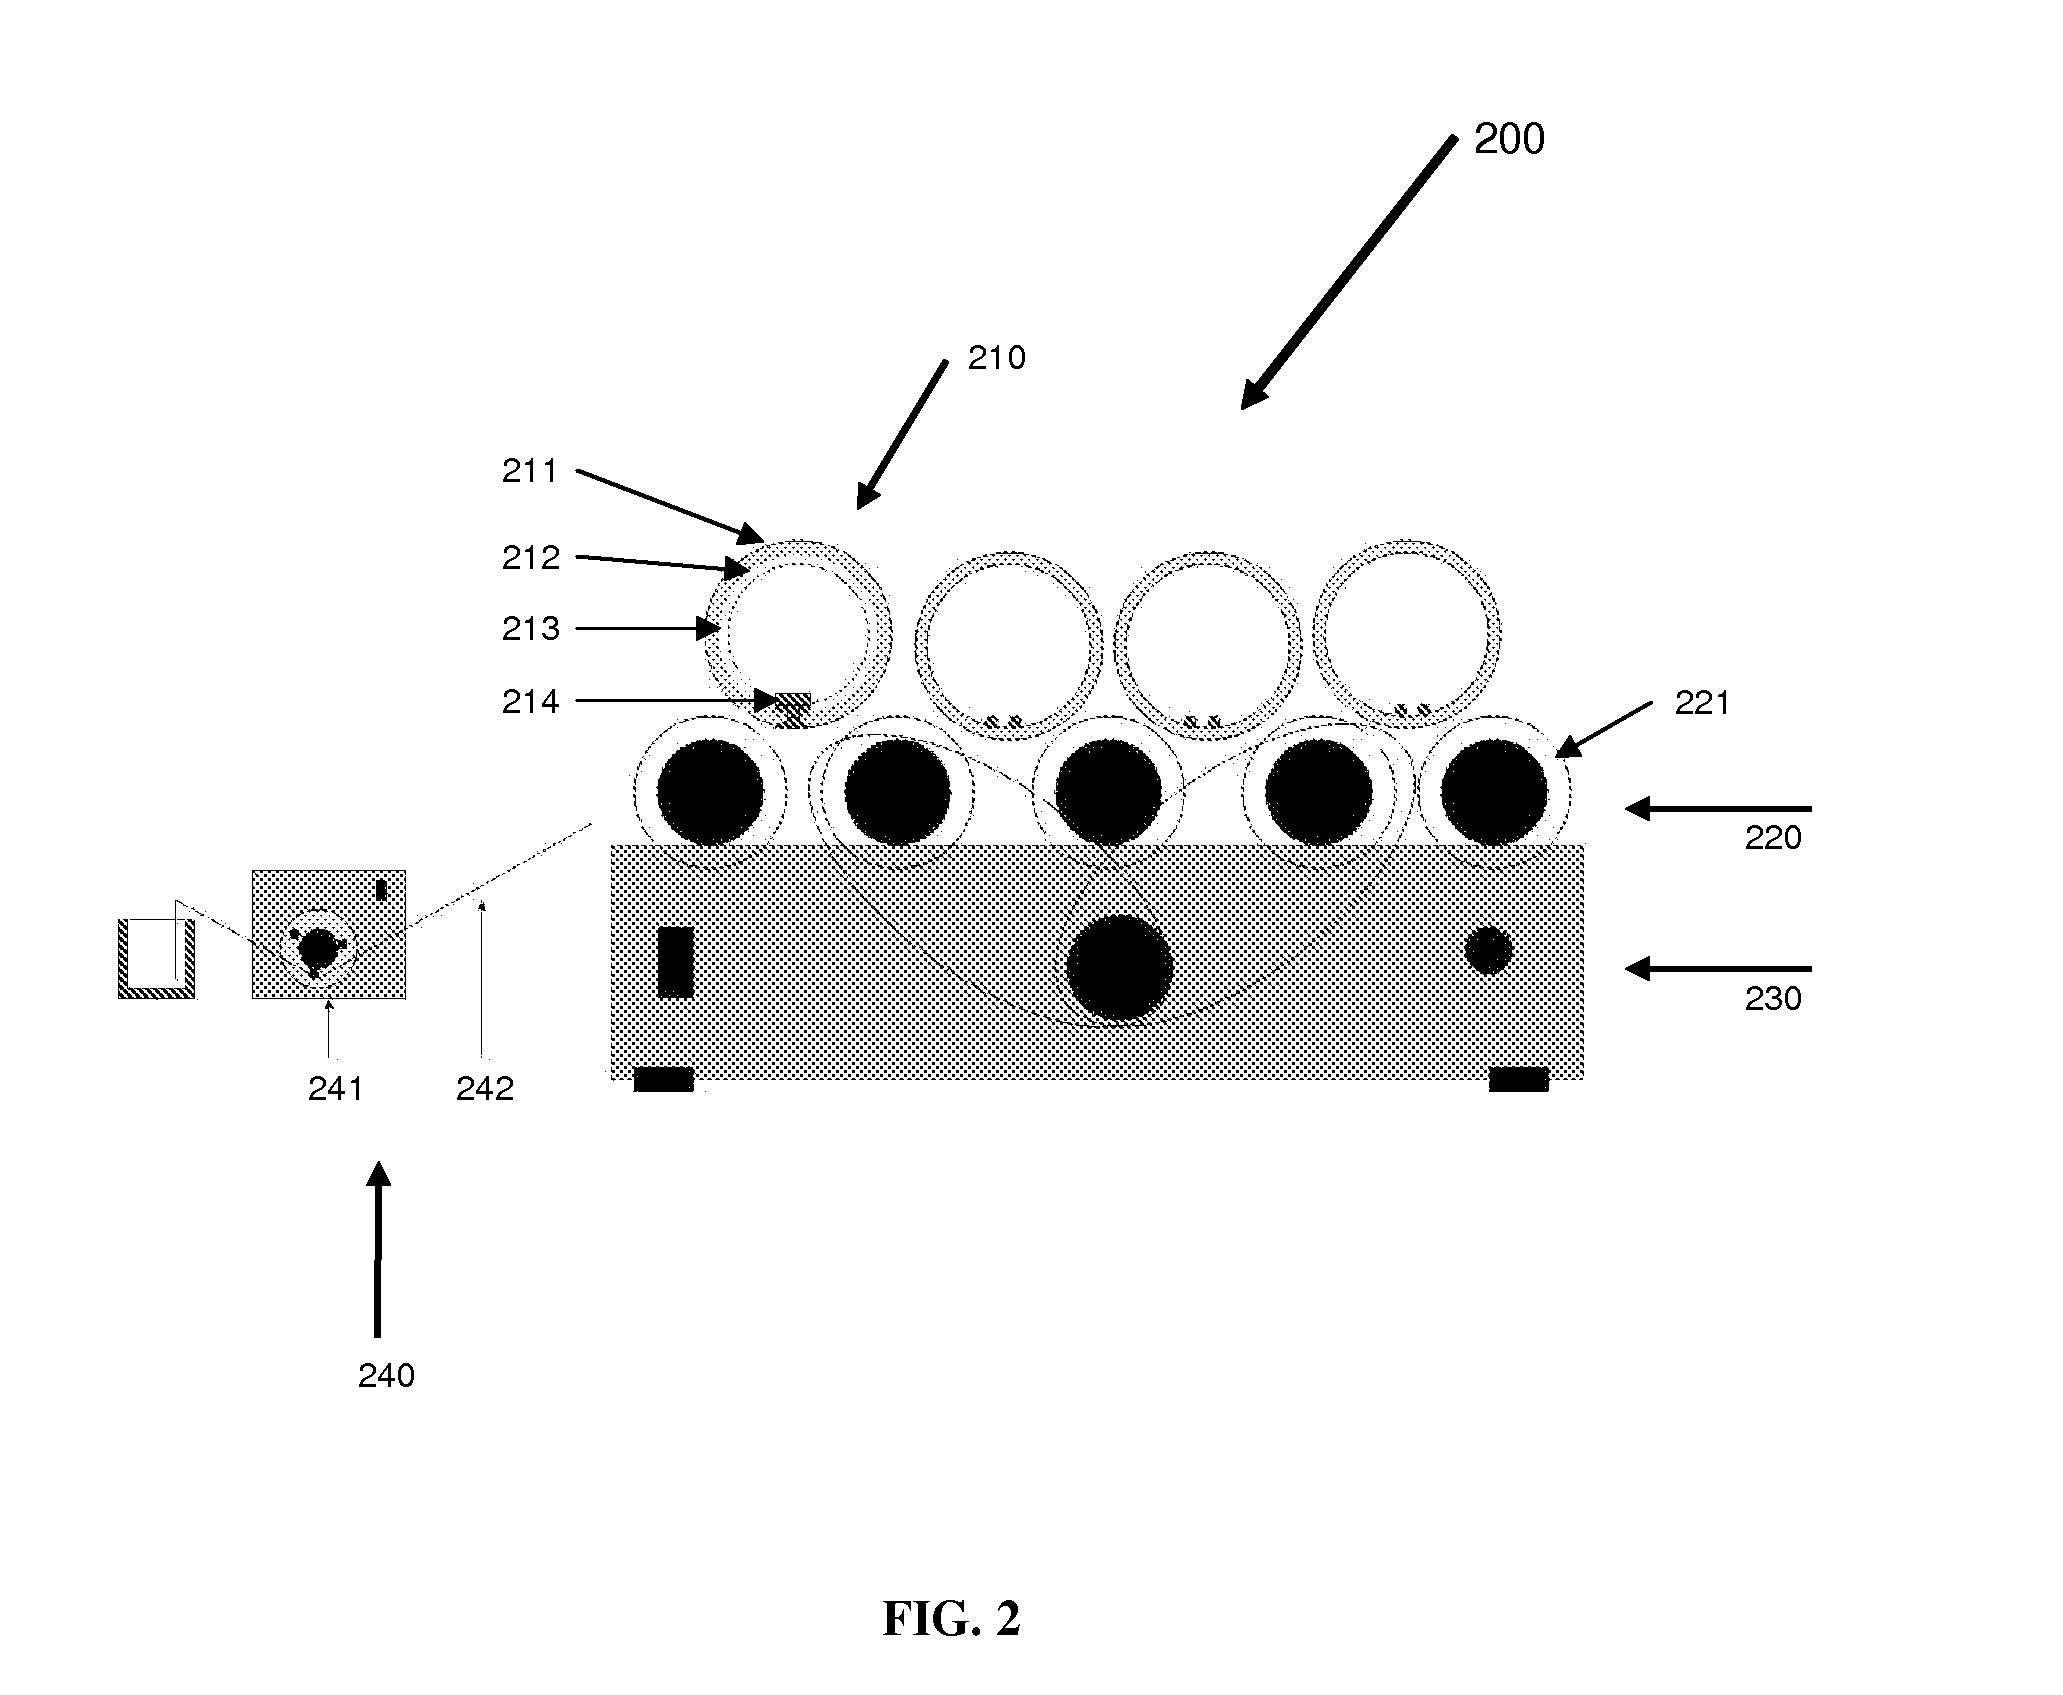 Methods for separation and immuno-detection of biomolecules, and apparatus related thereto